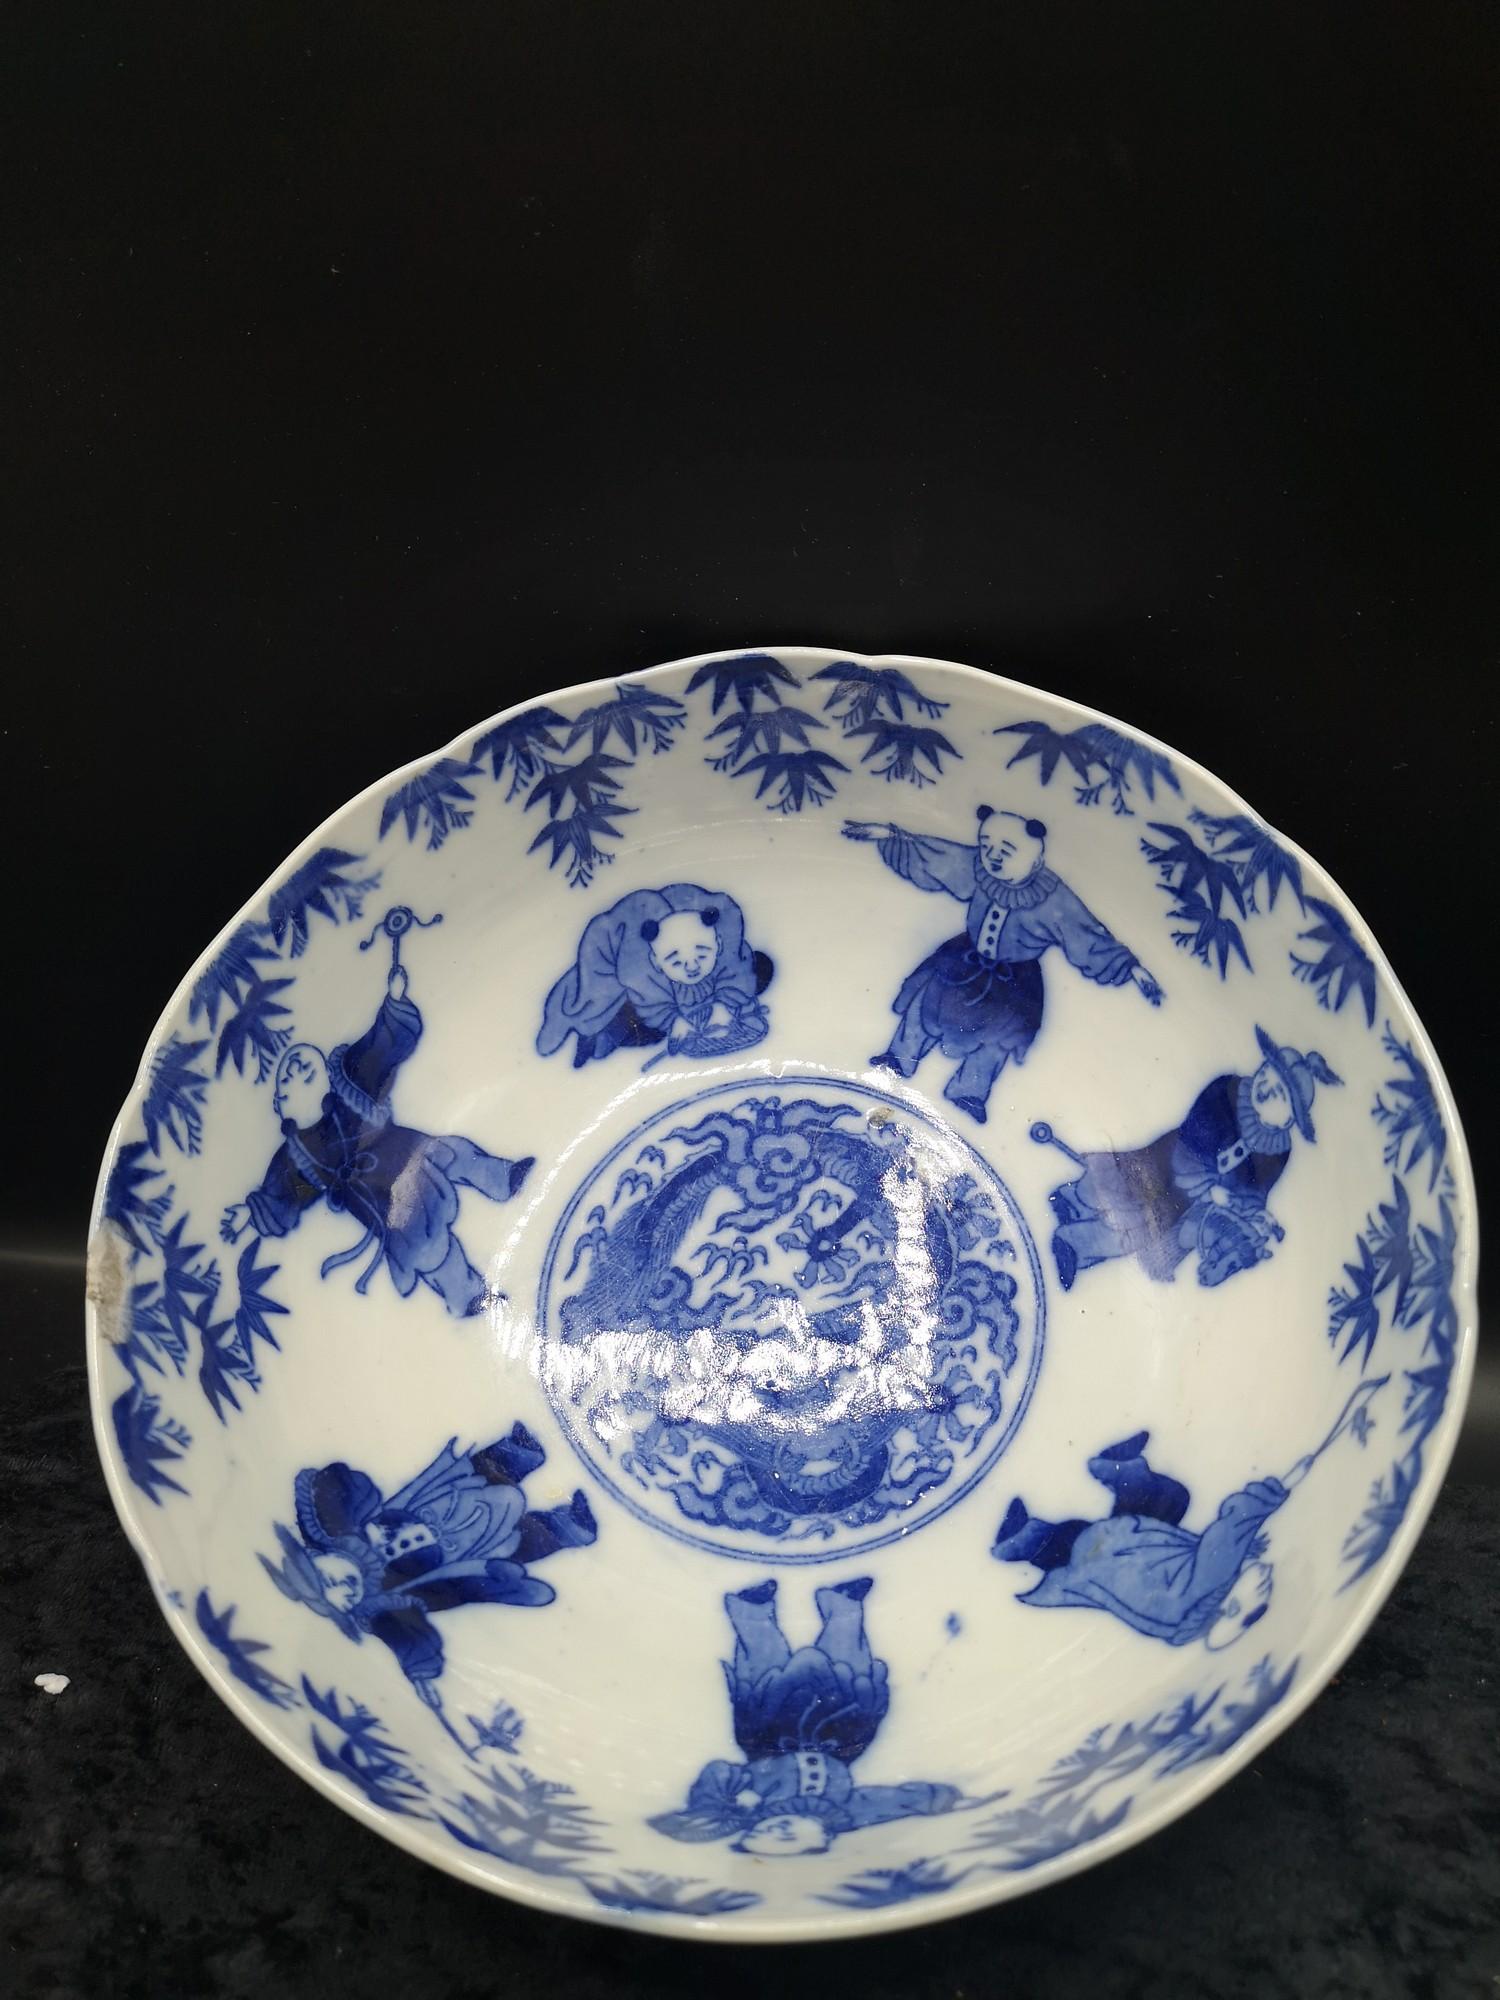 Chinese bowl depicting gathering in blue and white form with character bstanp to base. As found.